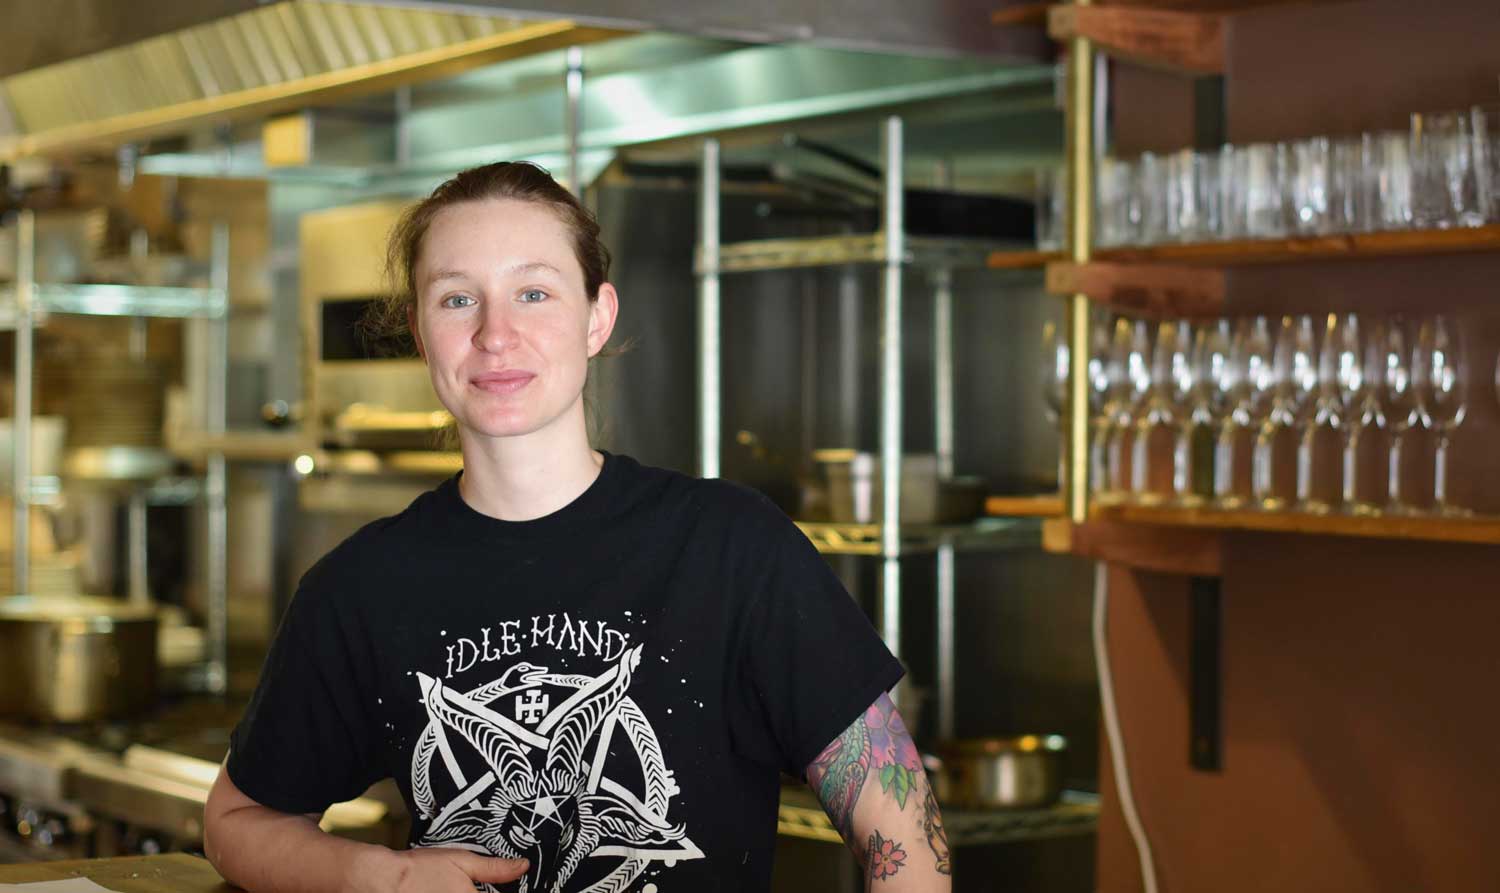 Chef Sara Hauman is only 28 years old, but is making waves on San Francisco's food scene through her work at Huxley